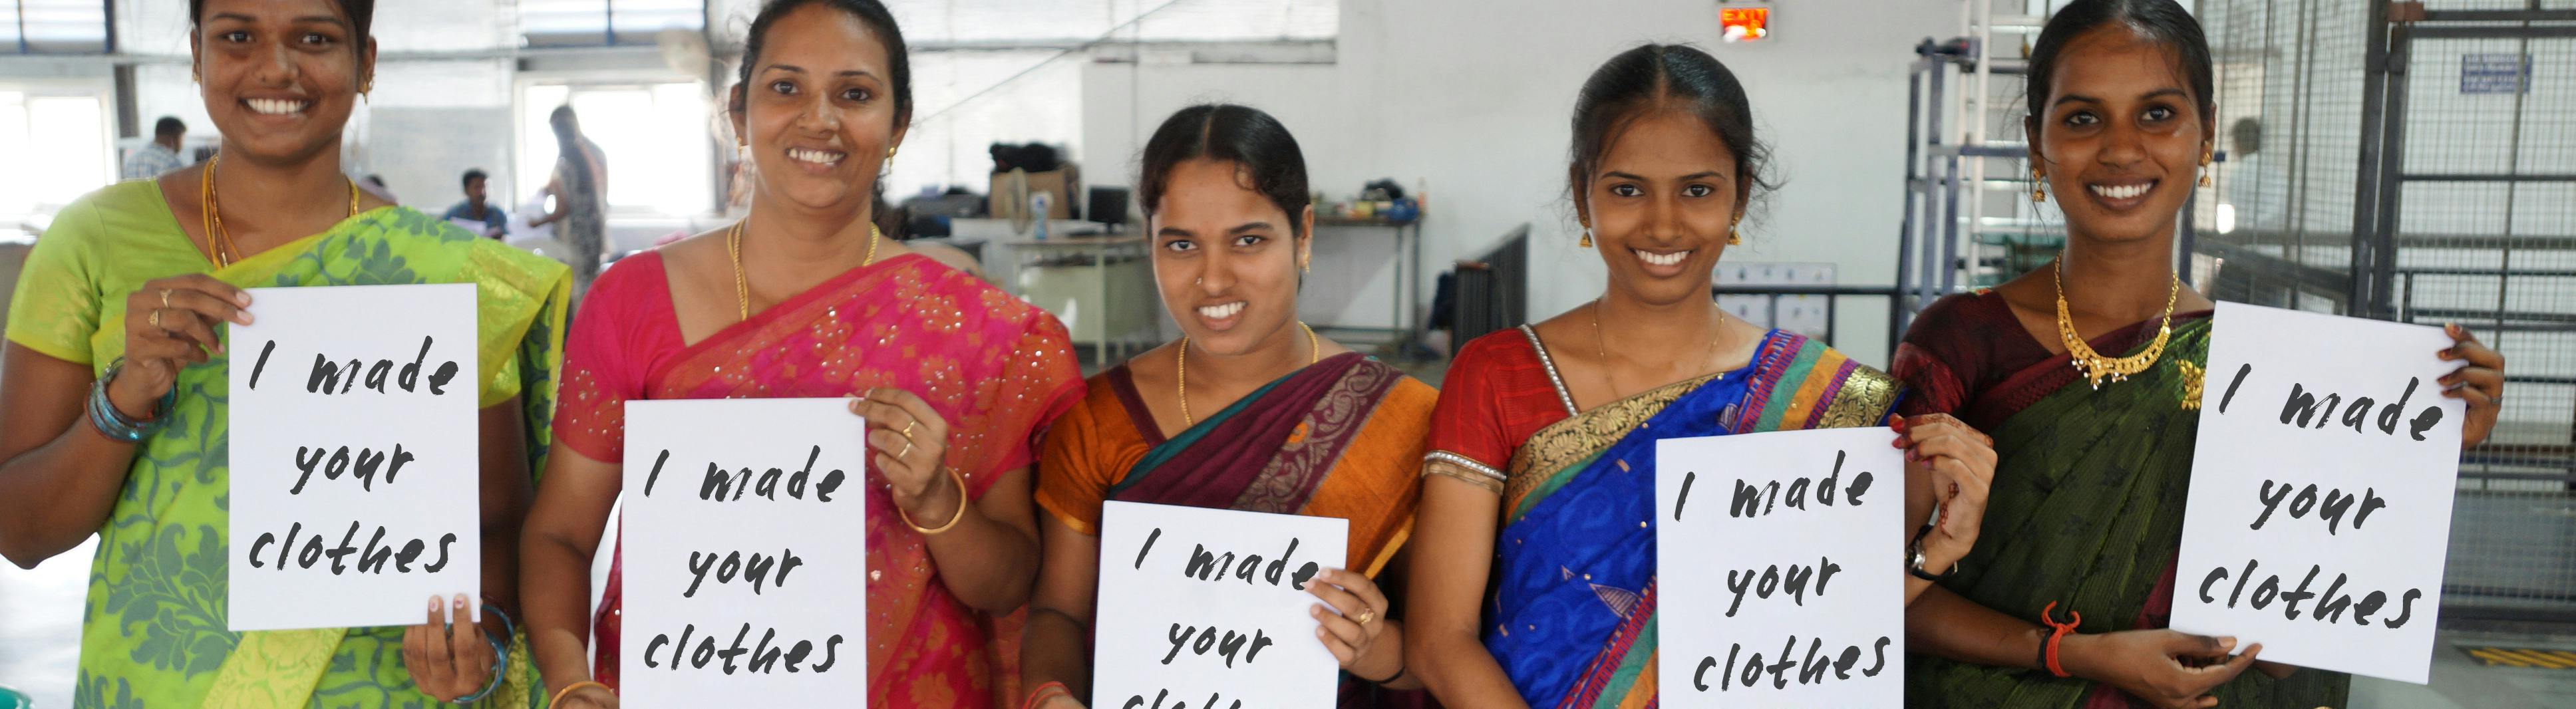 Five people smiling hold a sign saying "I made your clothes"